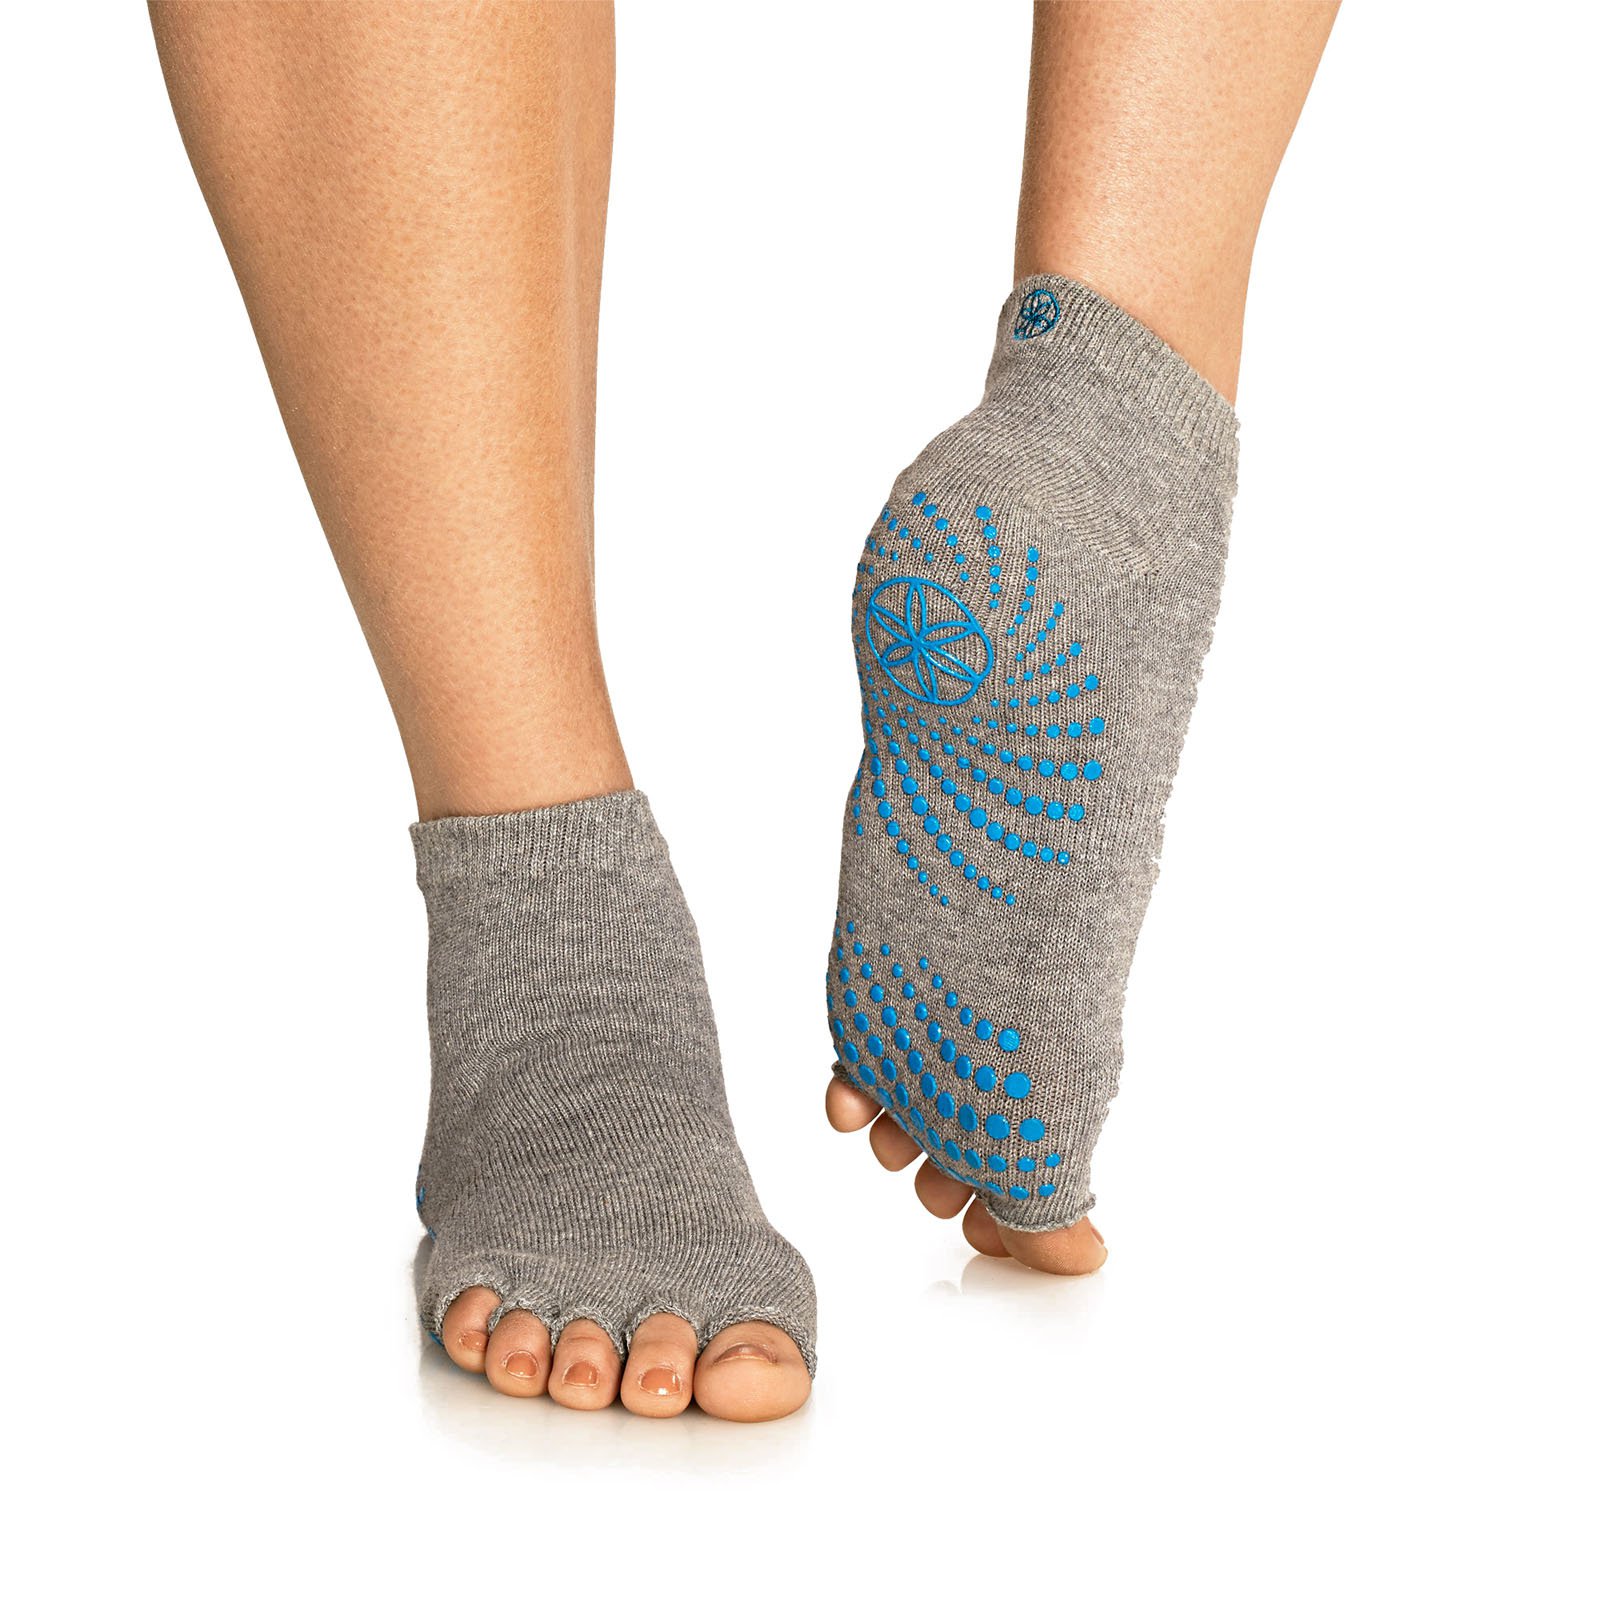 Gaiam Toeless Grippy Yoga Socks, Grey, One Size Fits Most - image 3 of 5